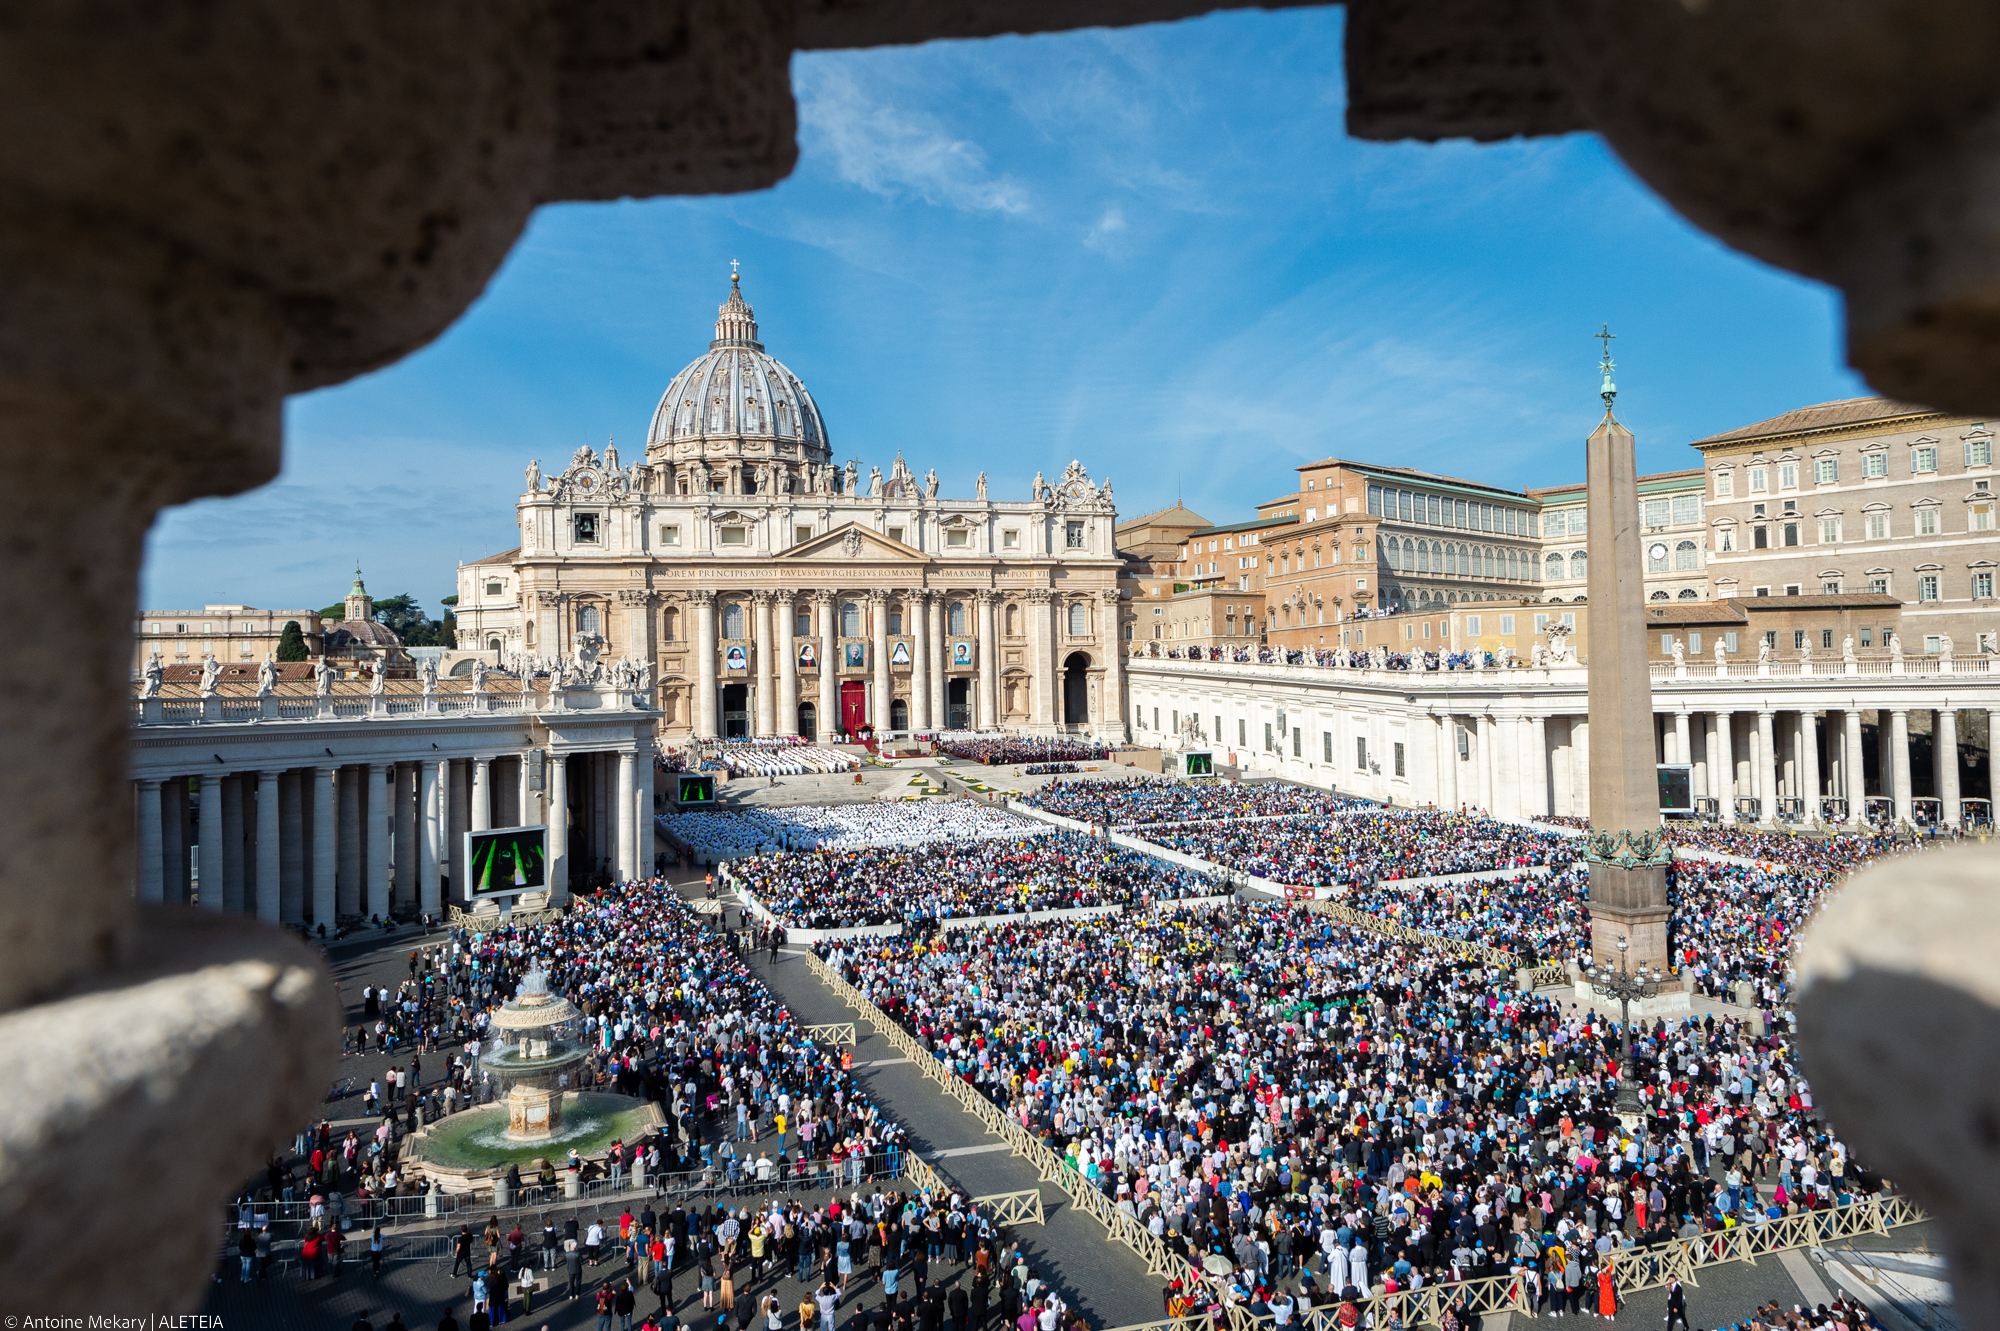 St.-Peters-sqaure-During-the-Canonization-Holy-Mass